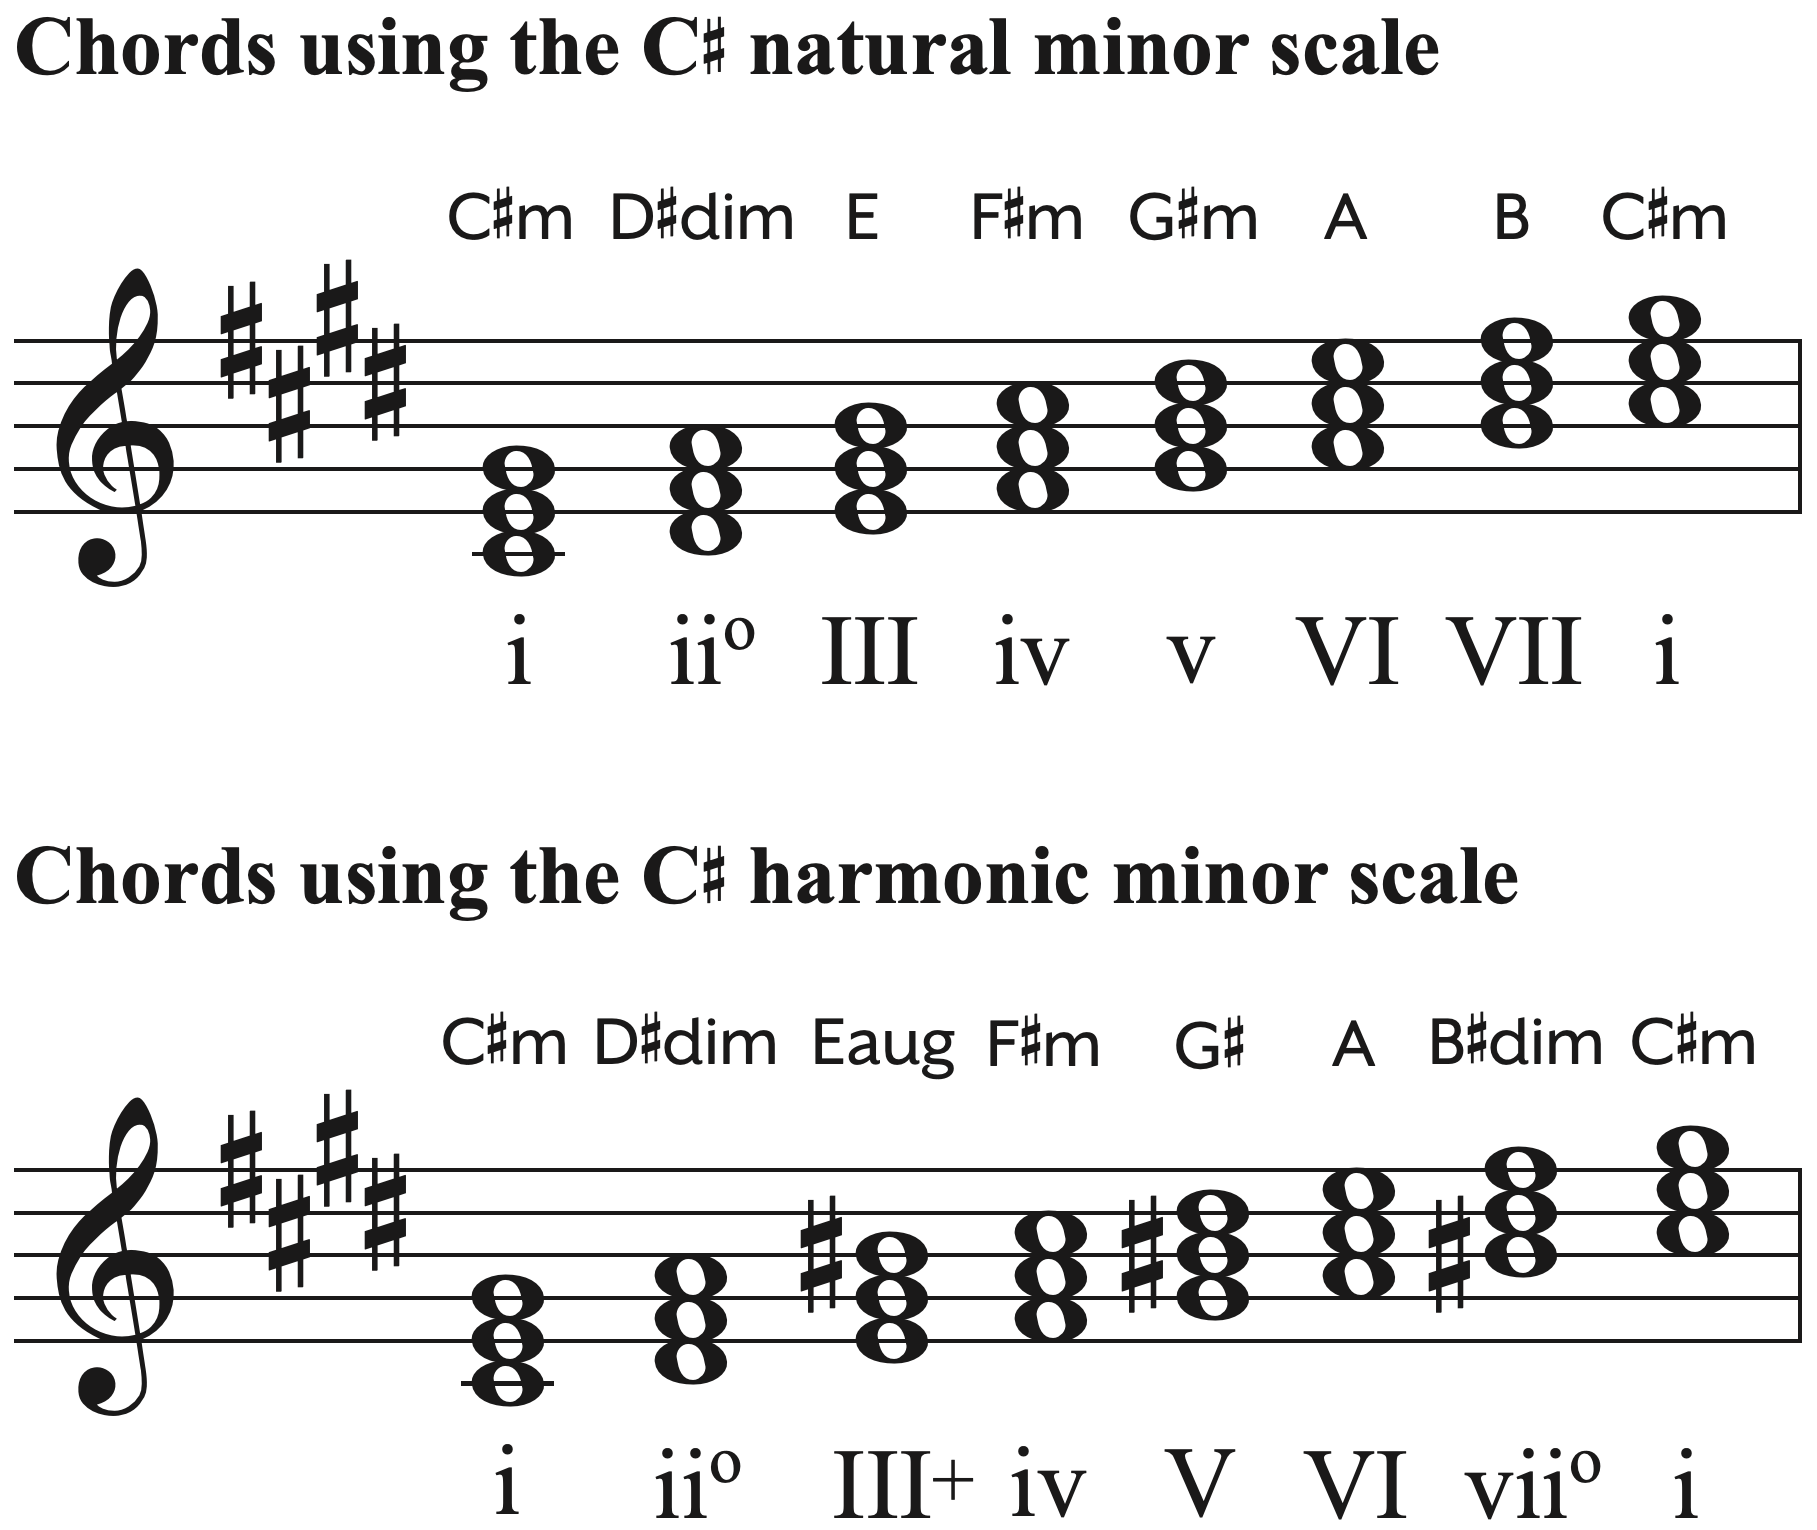 Chords using the C-sharp minor scale